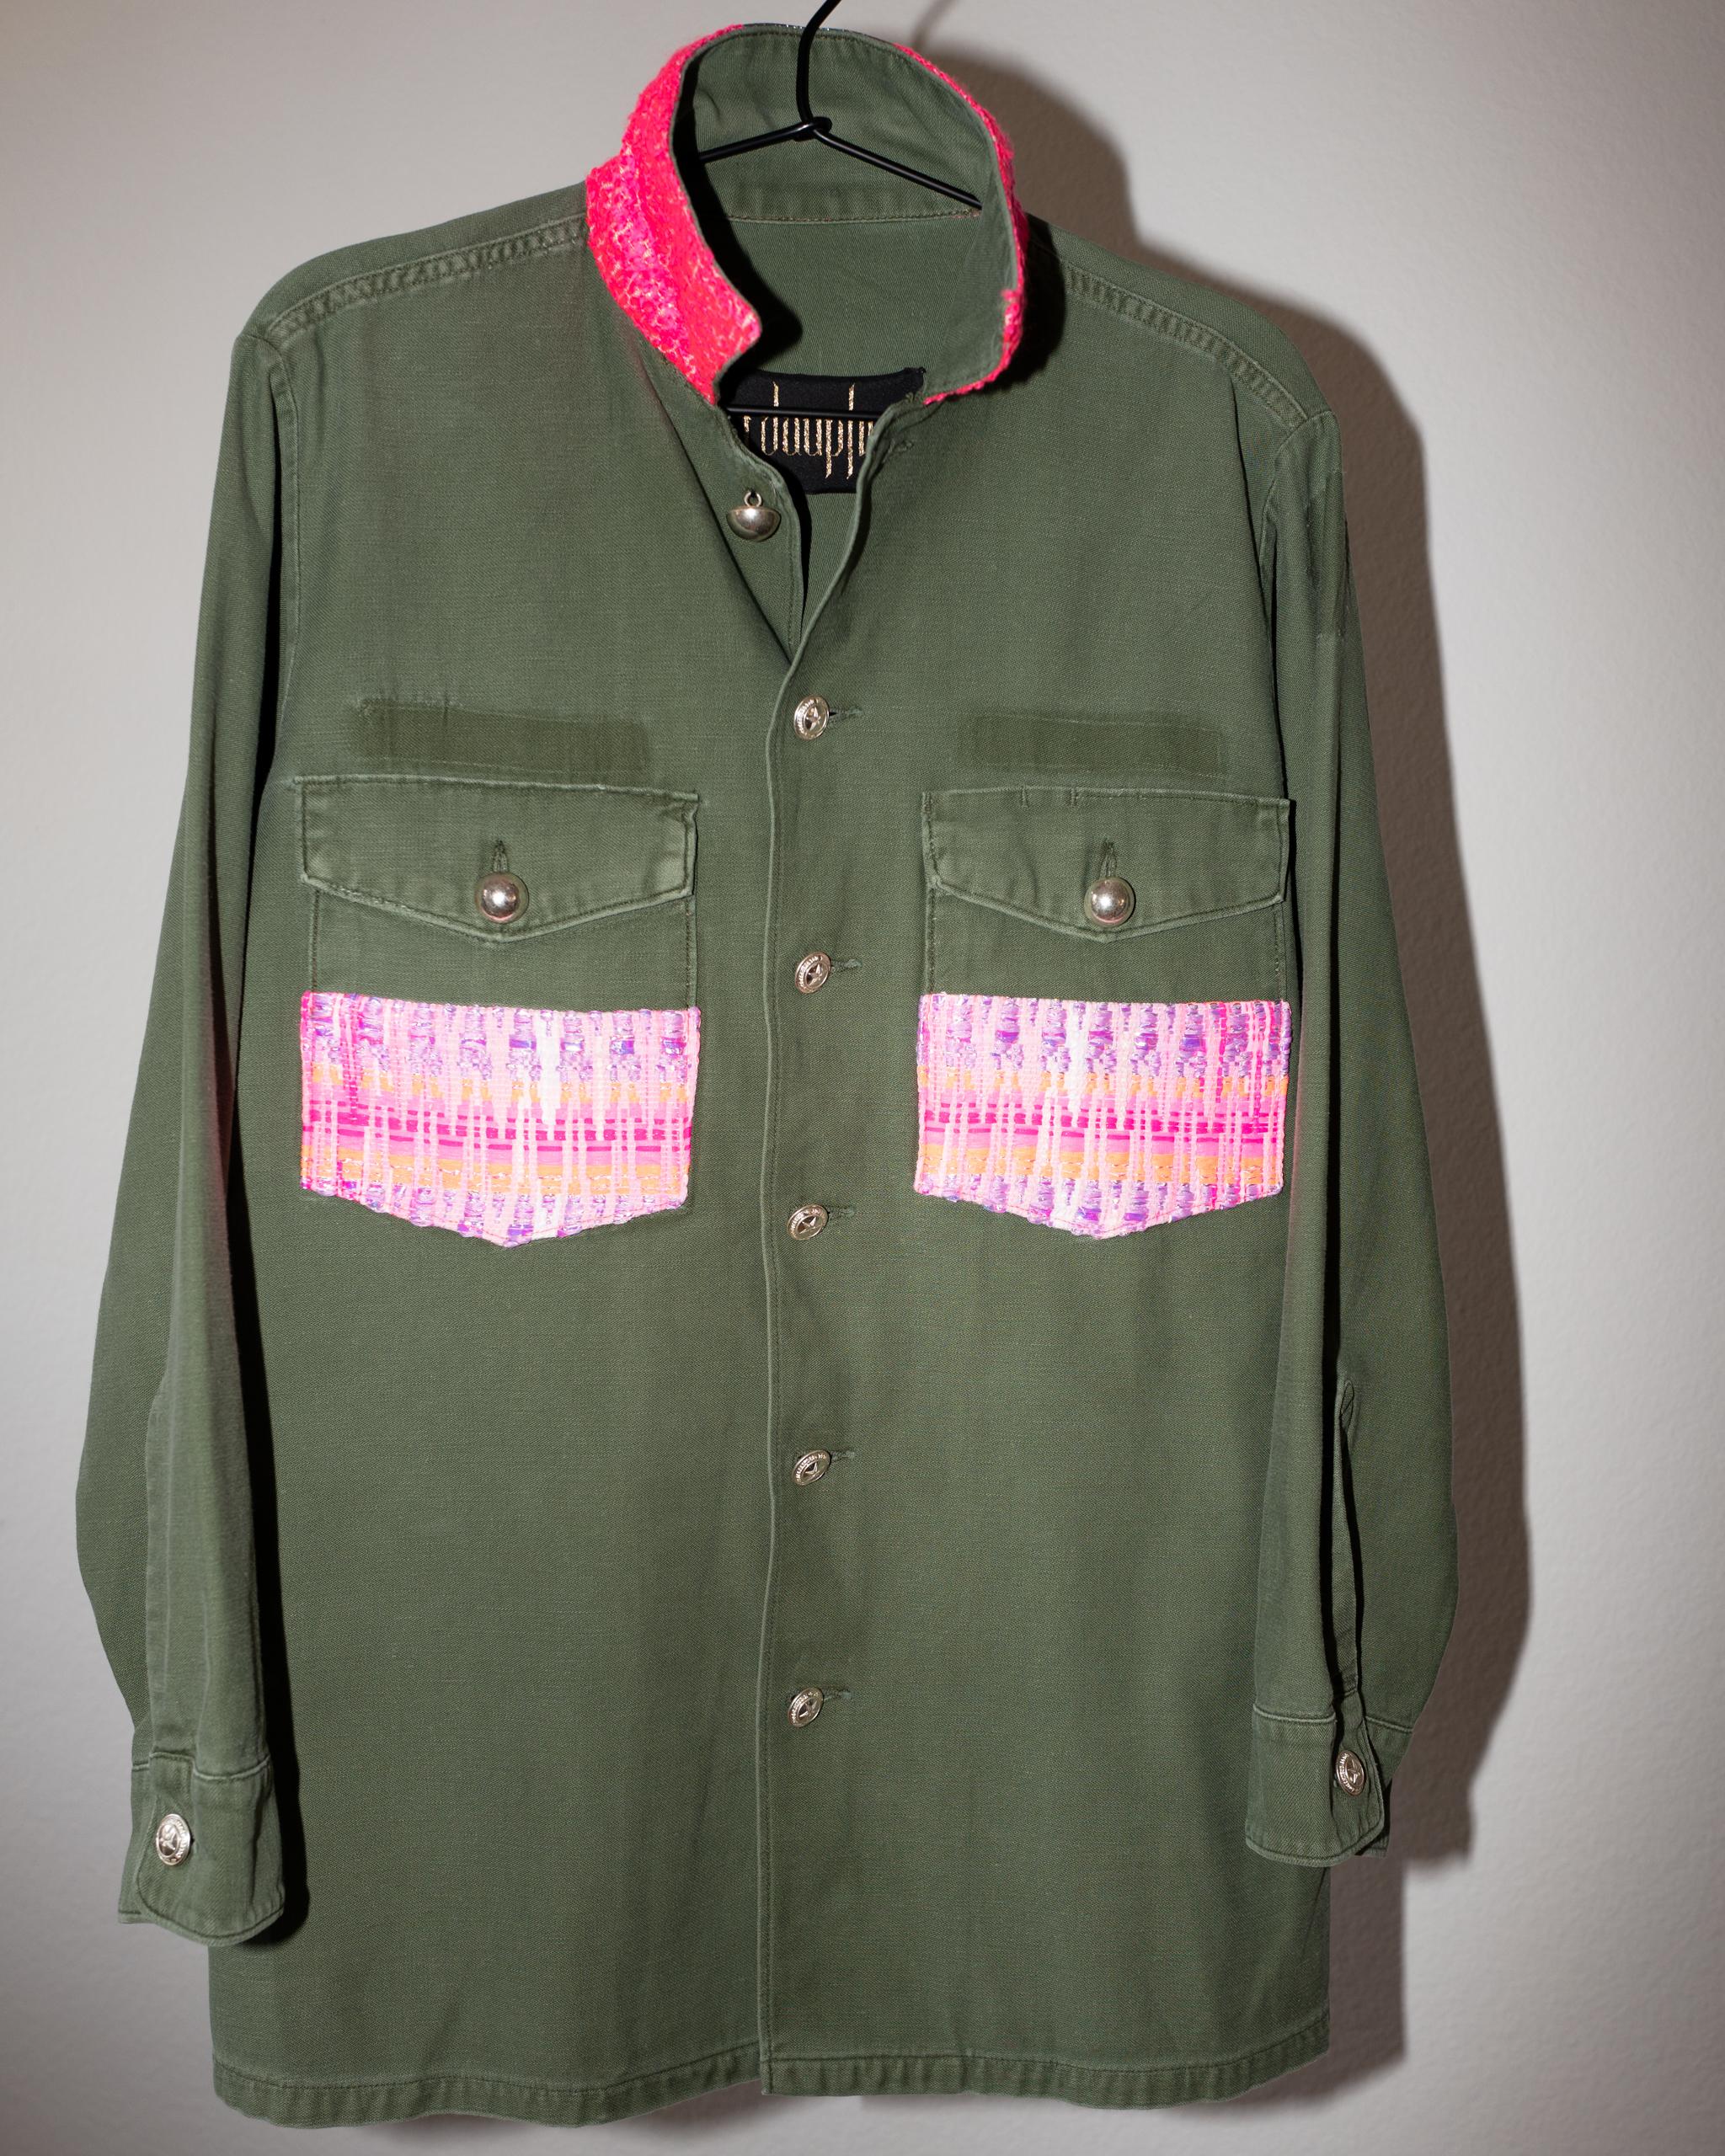 Vintage one of a kind distressed Green Military Jacket with French Neon Pink Tweed Pockets and Neon Pink Collar , Vintage Silver plated Brass Buttons from Paris around the 40